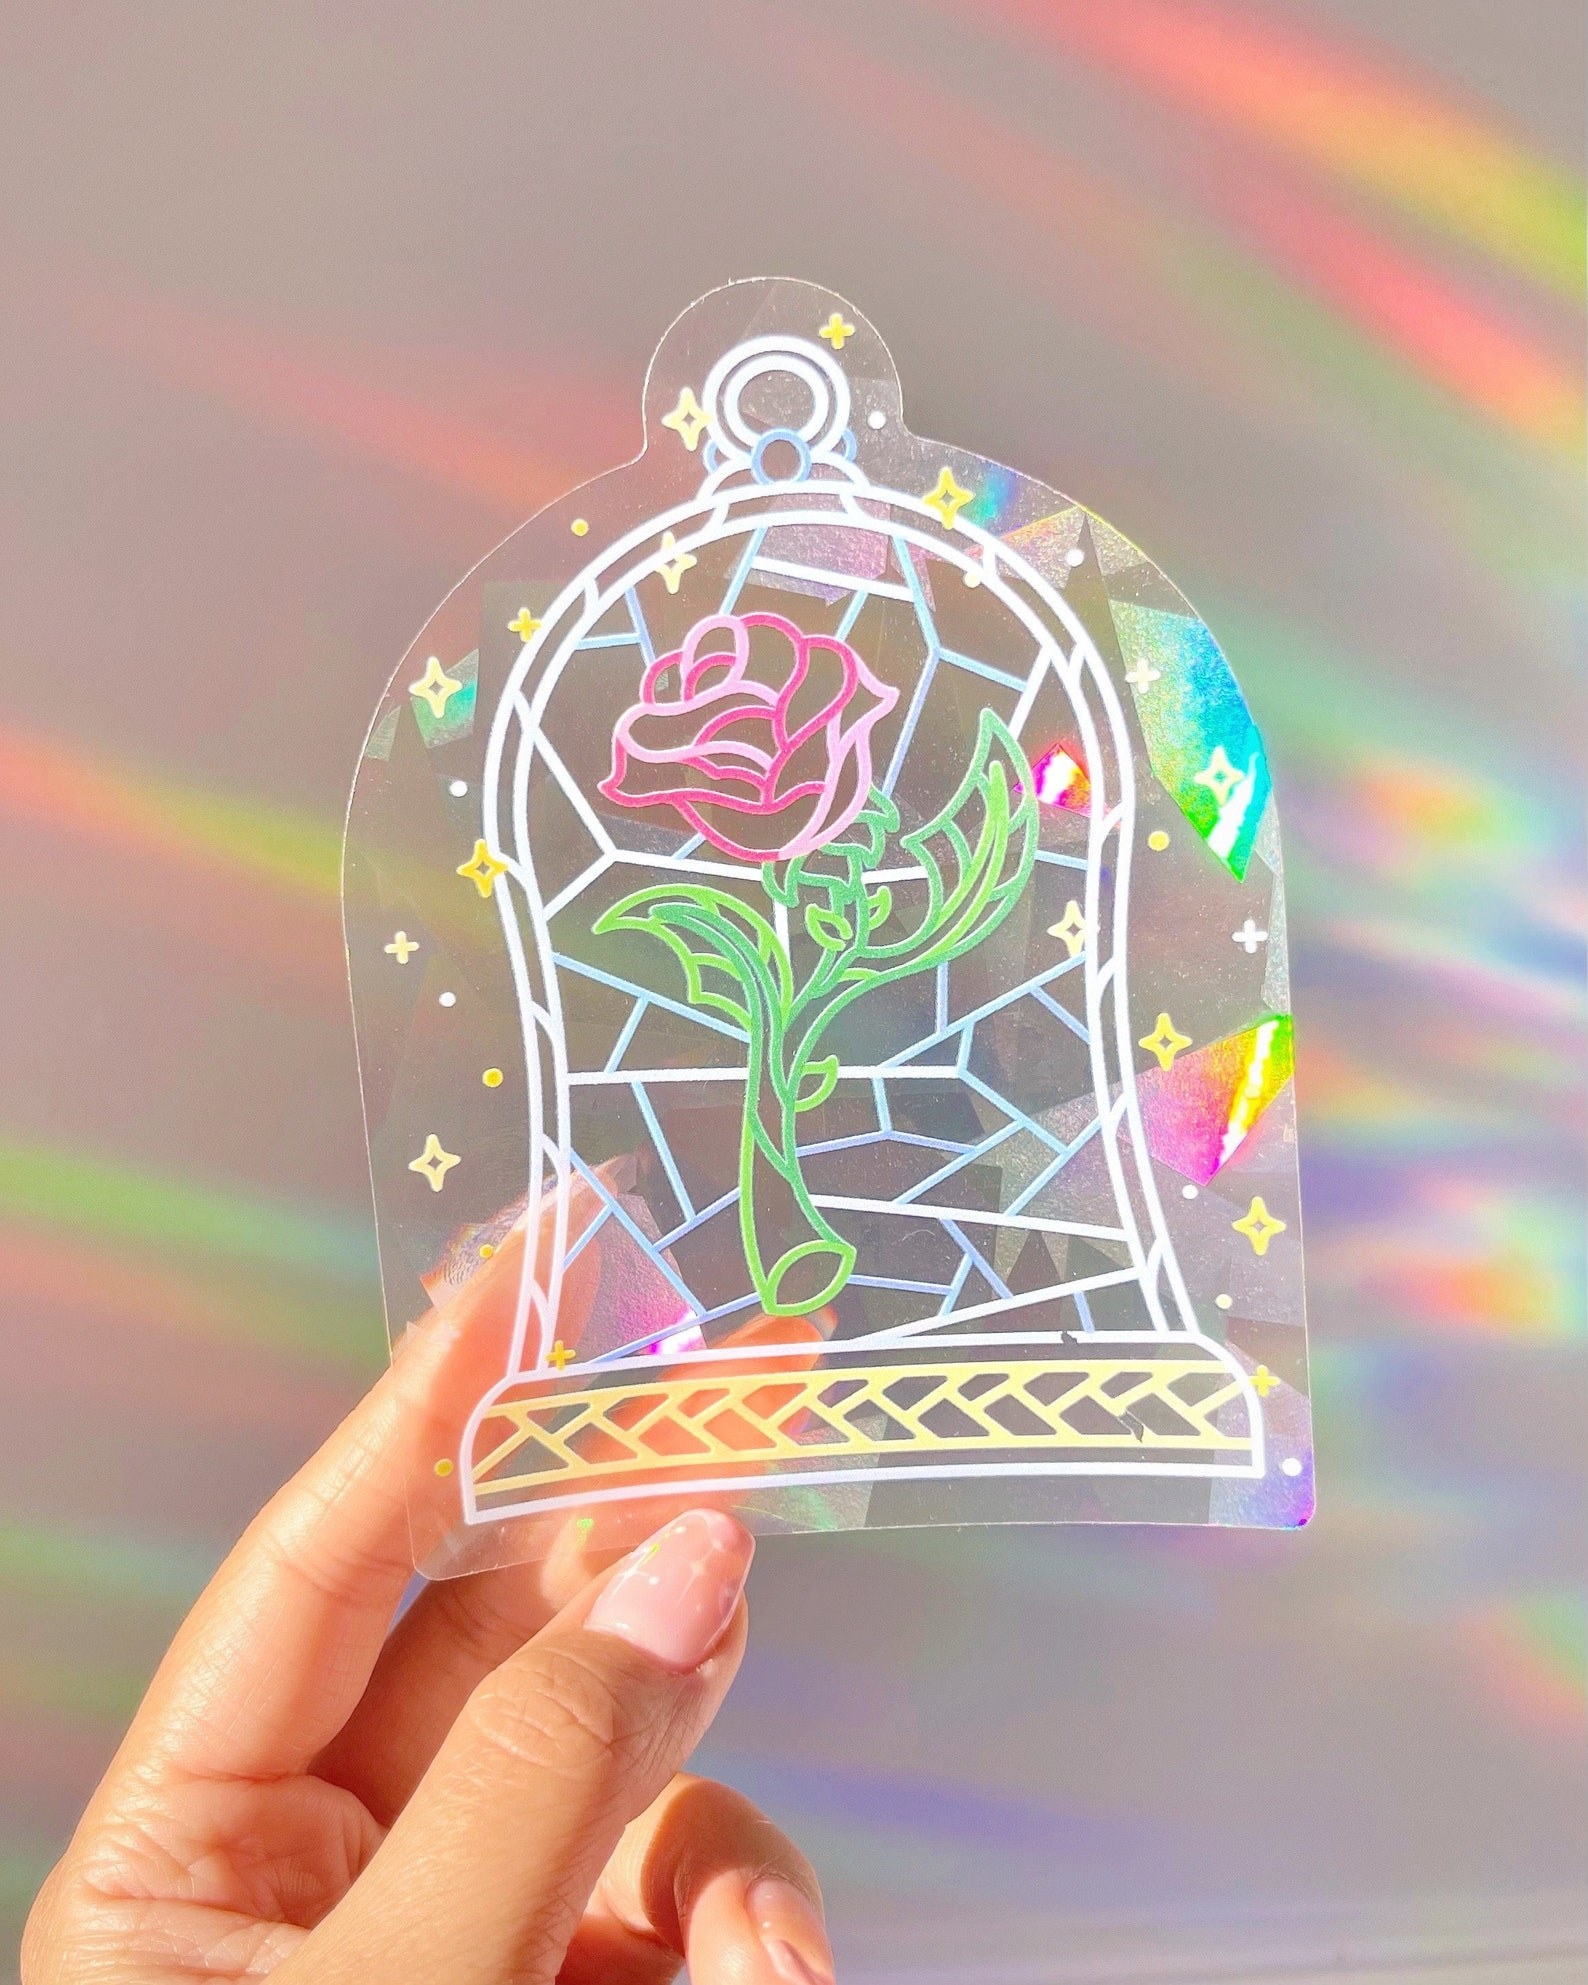 person holding up a sun catcher that has the enchanted rose from beauty and the beast on it